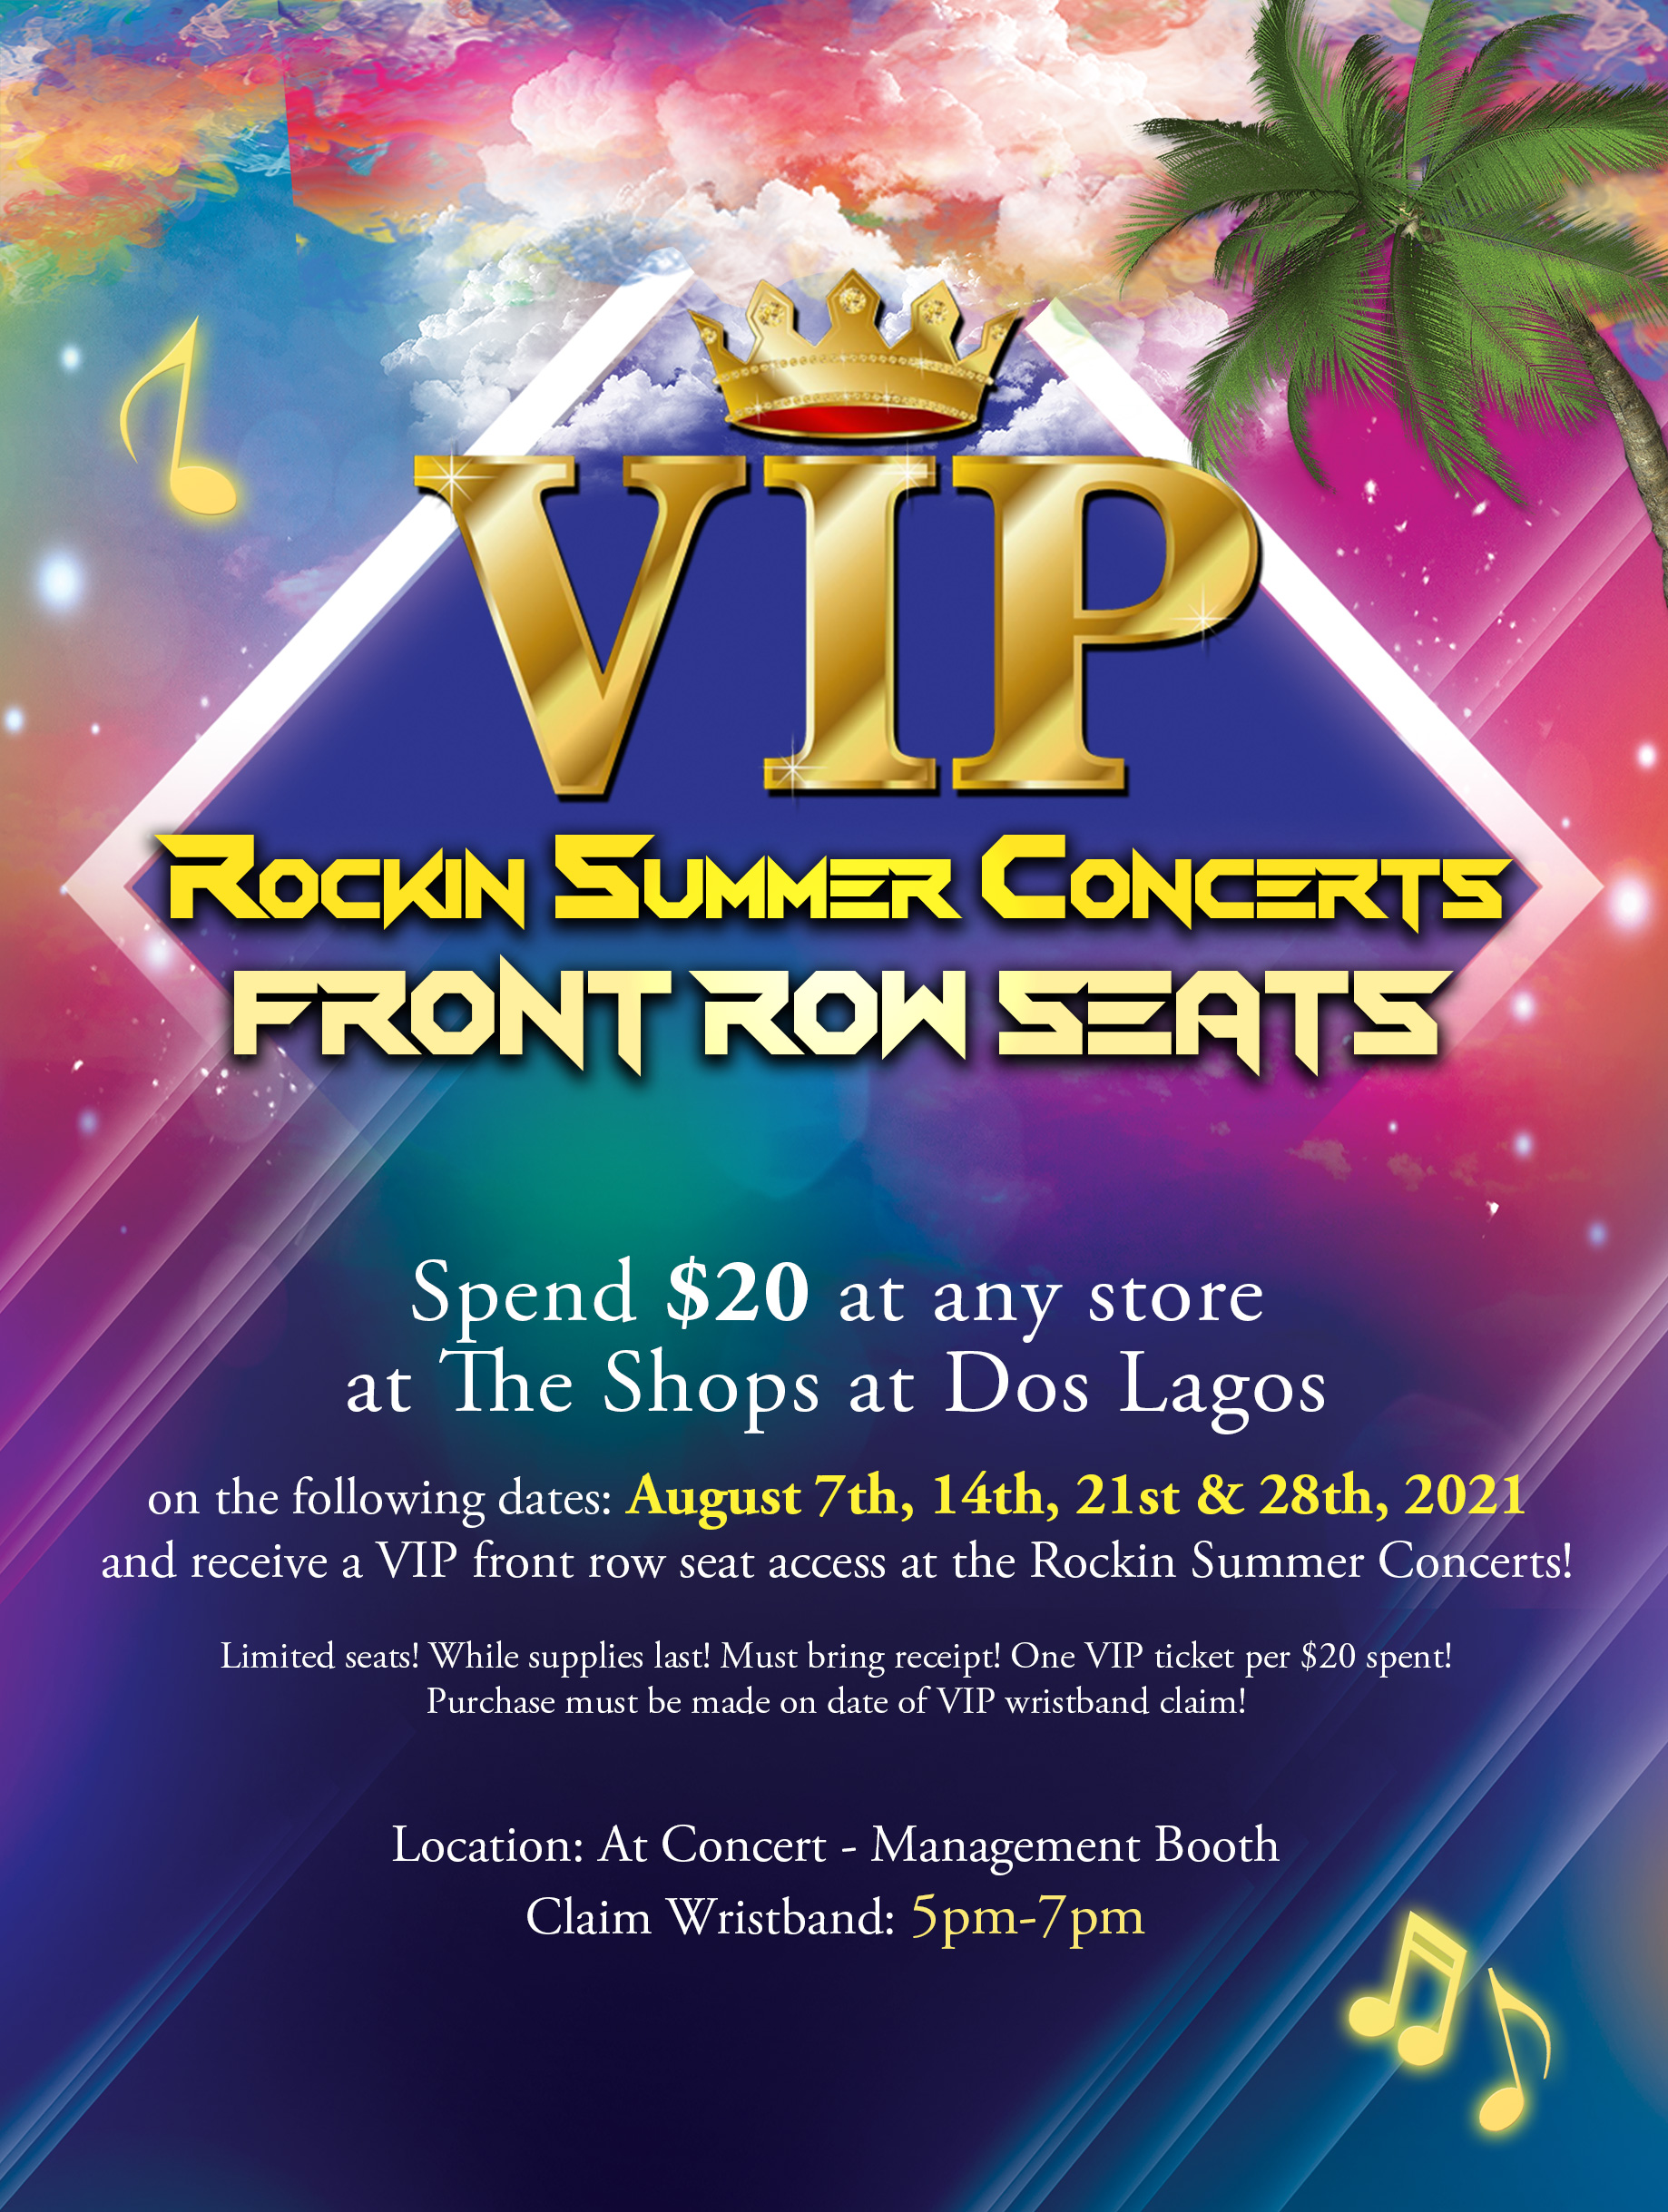 2021 Rockin Summer Concerts Save The Dates! The Shops at Dos Lagos